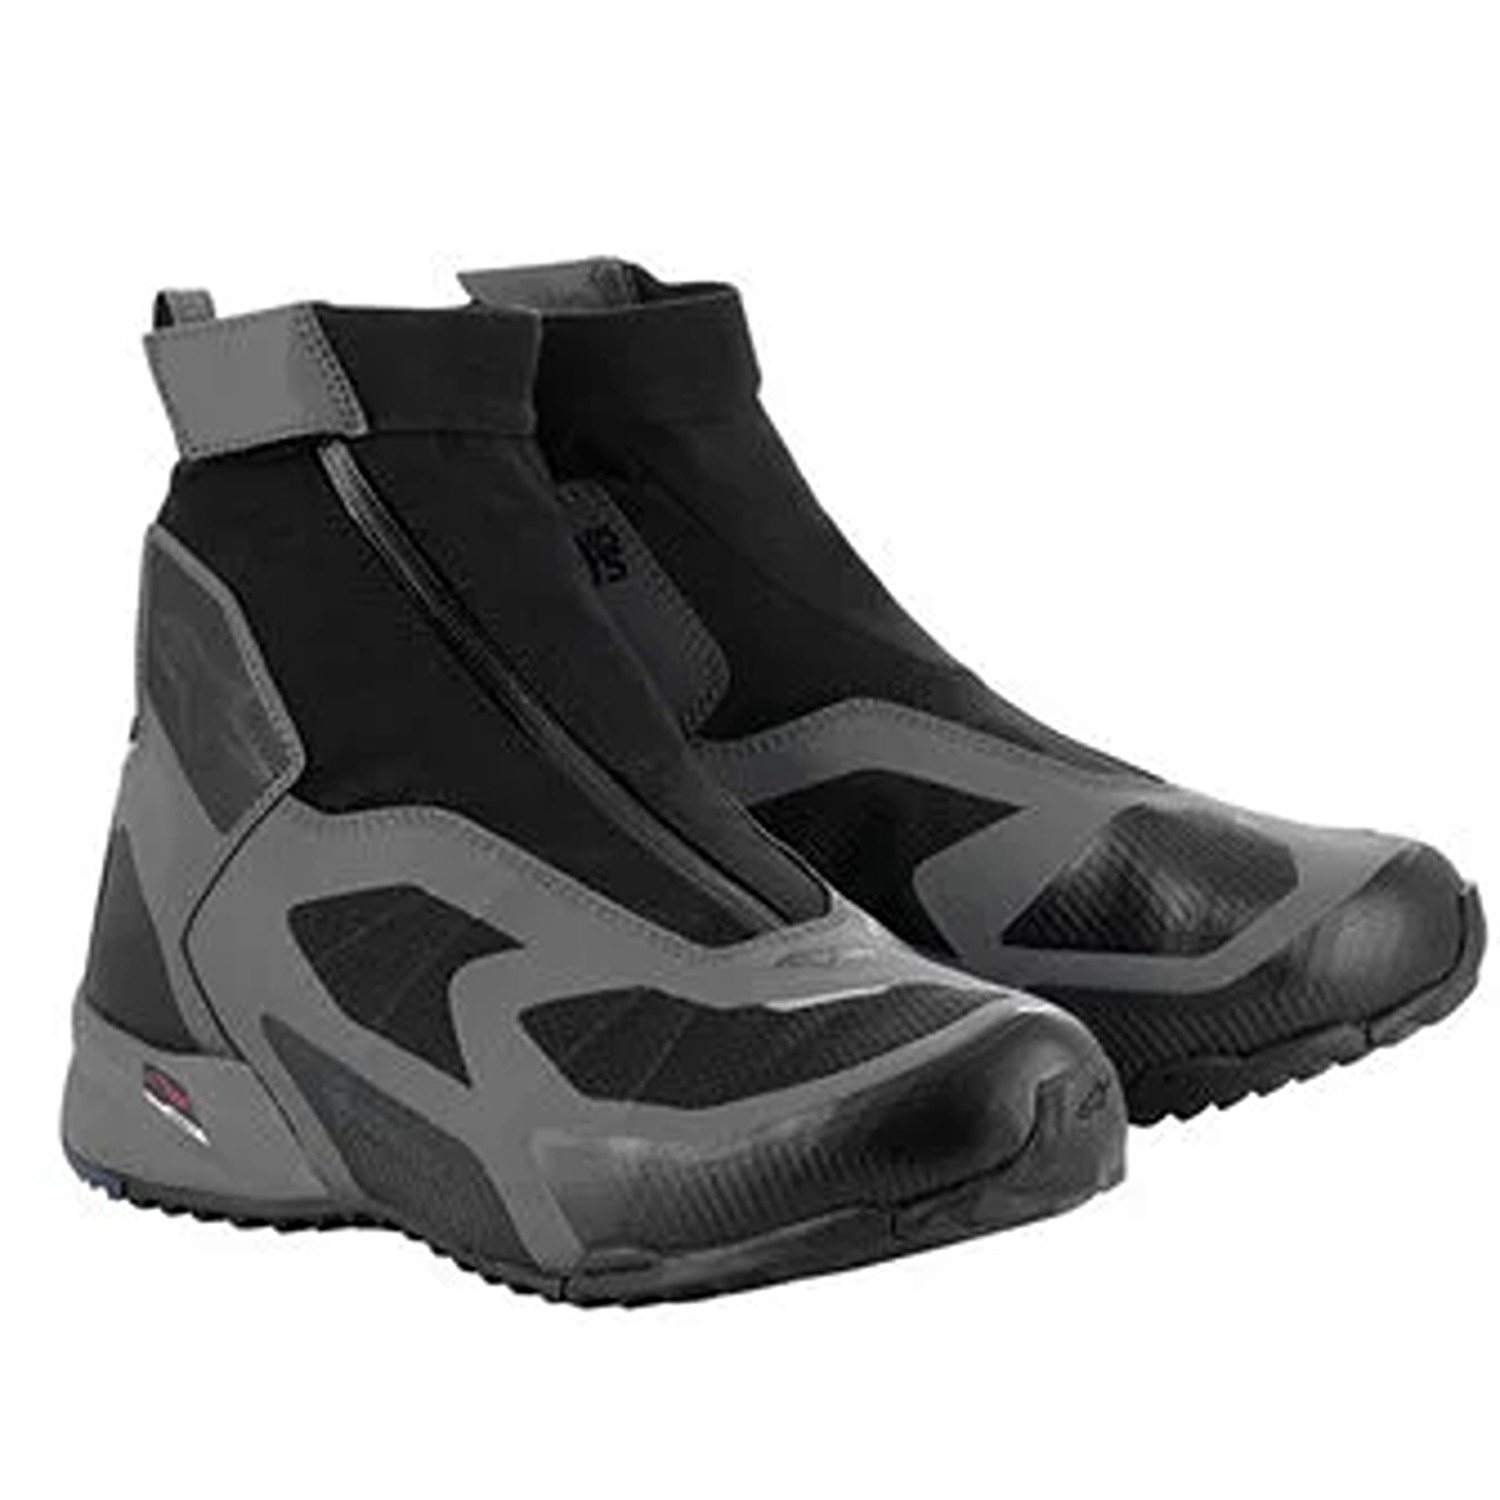 Image of Alpinestars CR-8 Gore-Tex Shoes Black Mid Gray Bright Red Size US 105 EN